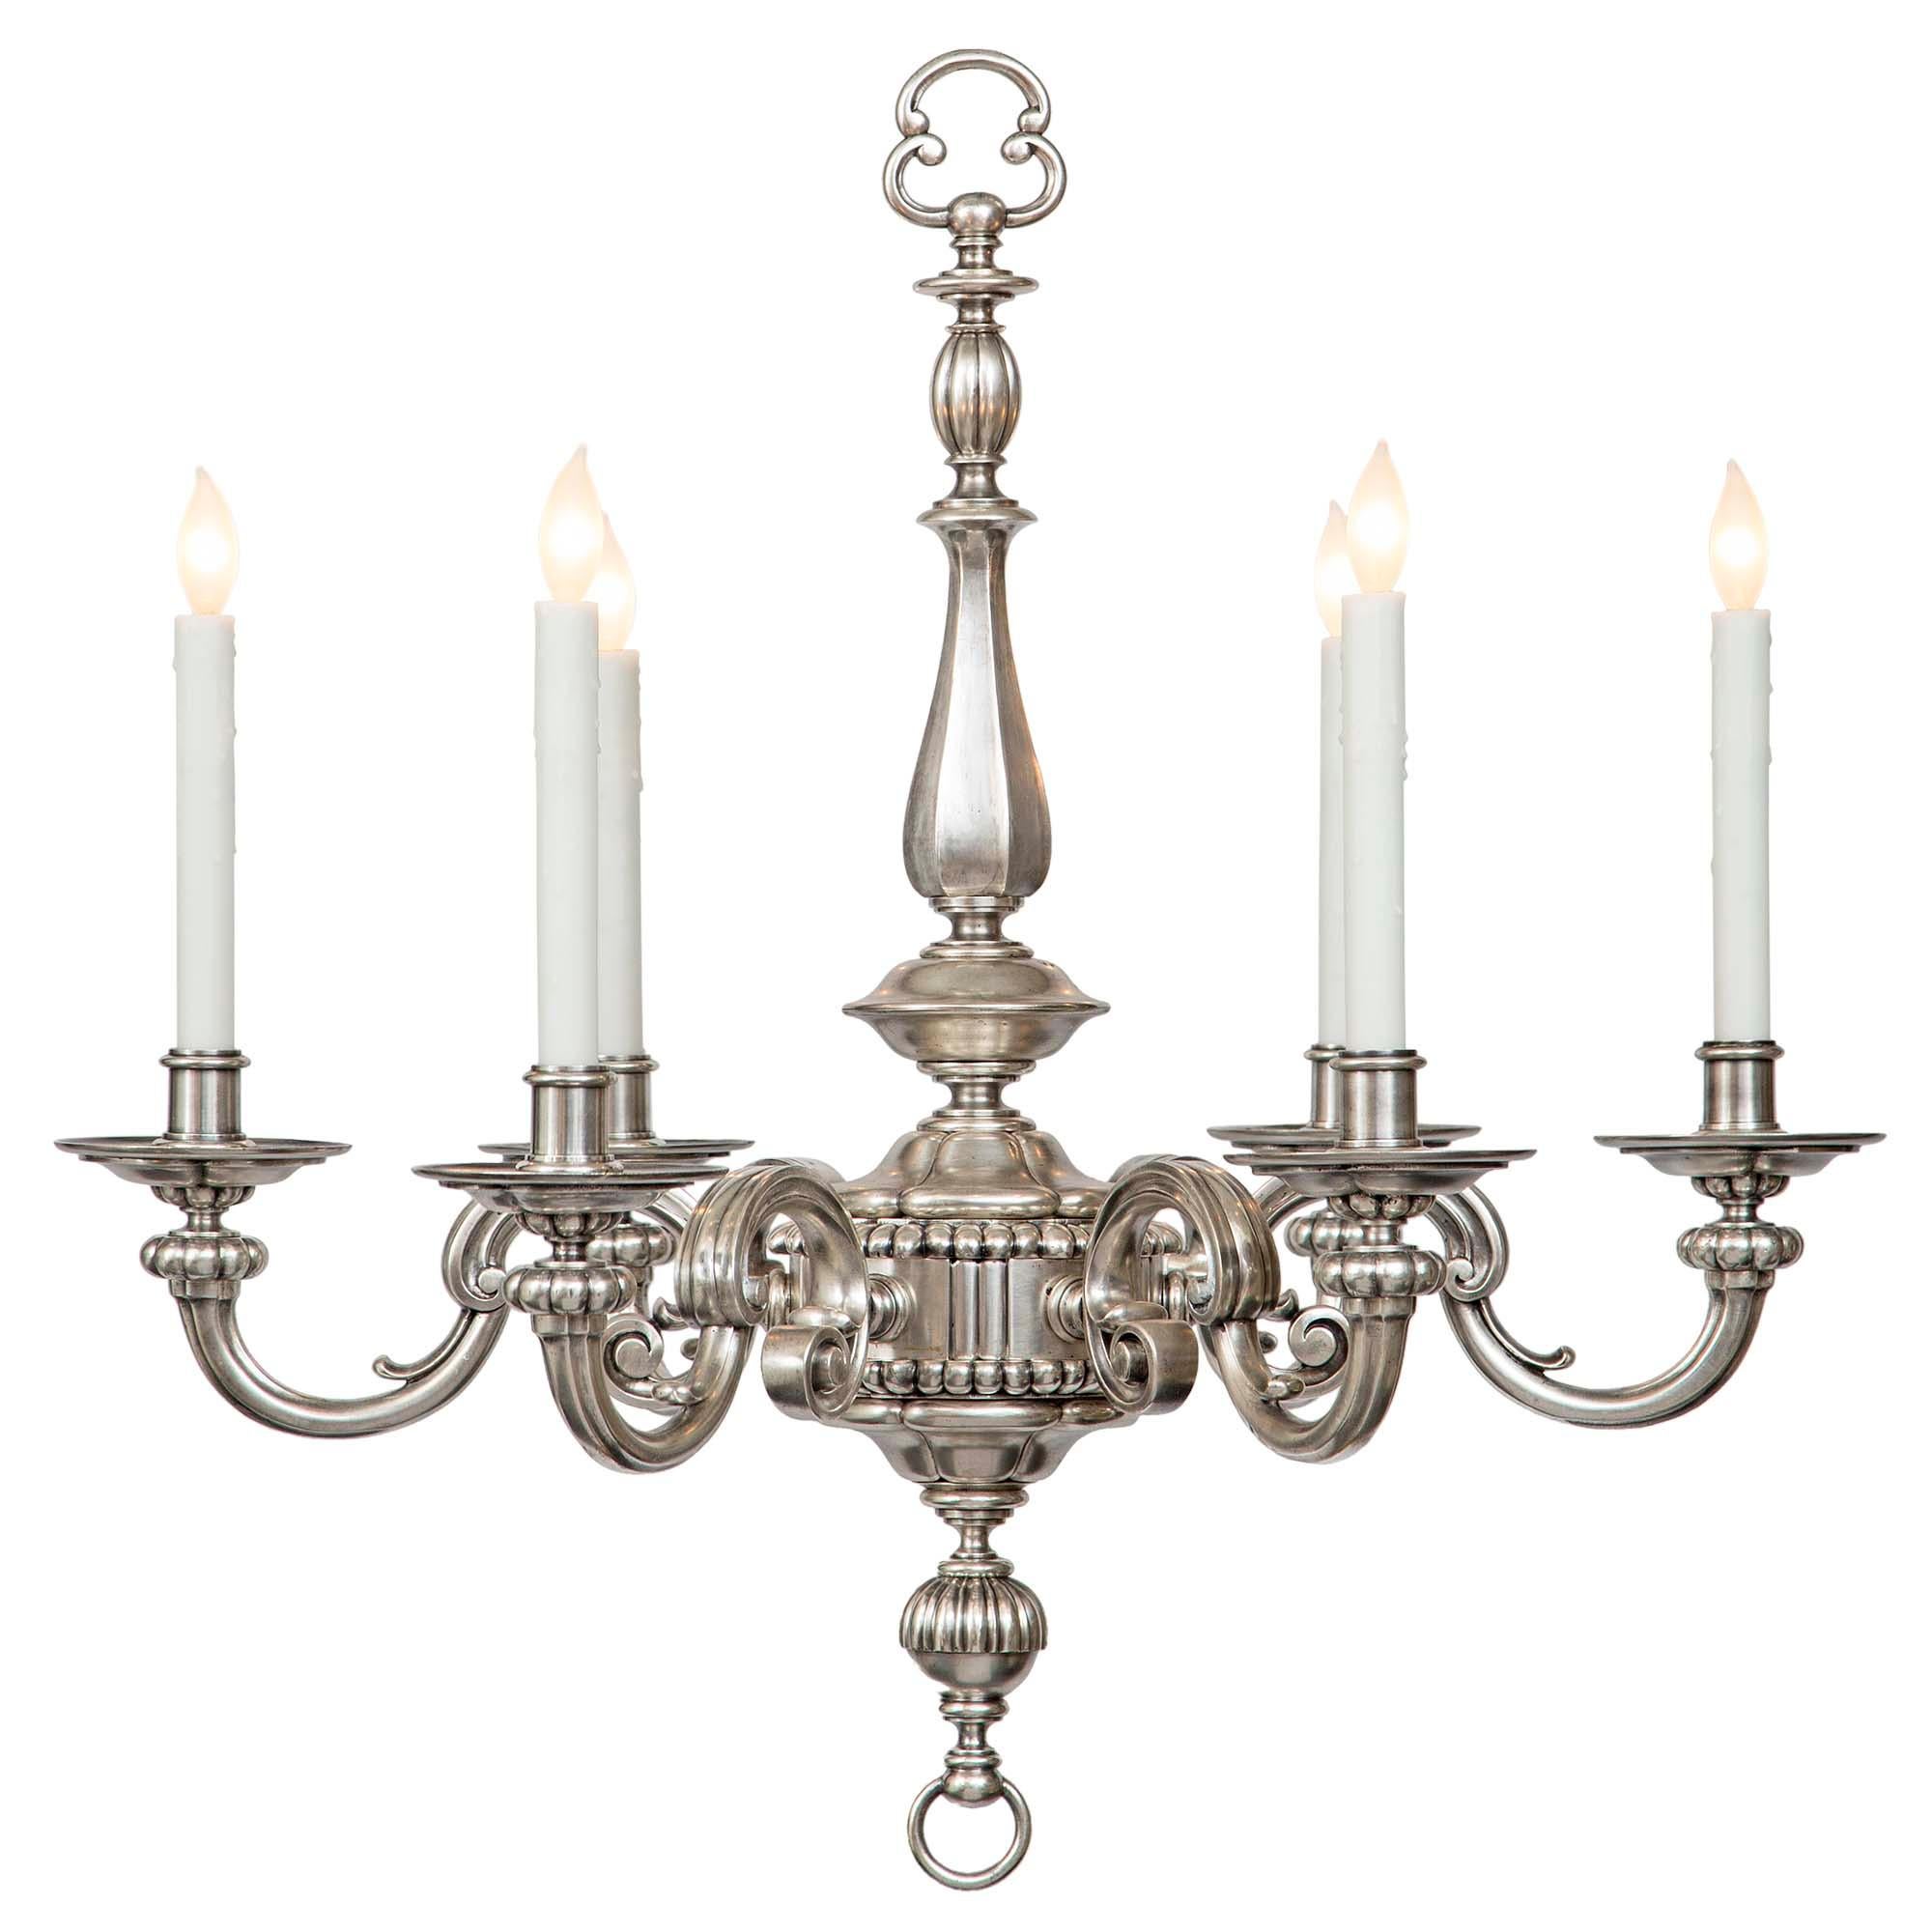 A superb Continental 19th century silvered bronze six arm chandelier. The chandelier is centered by a bottom ring below a decorative reeded design. Each of the elegantly scrolled arms branch out from a beaded and reeded center and also display